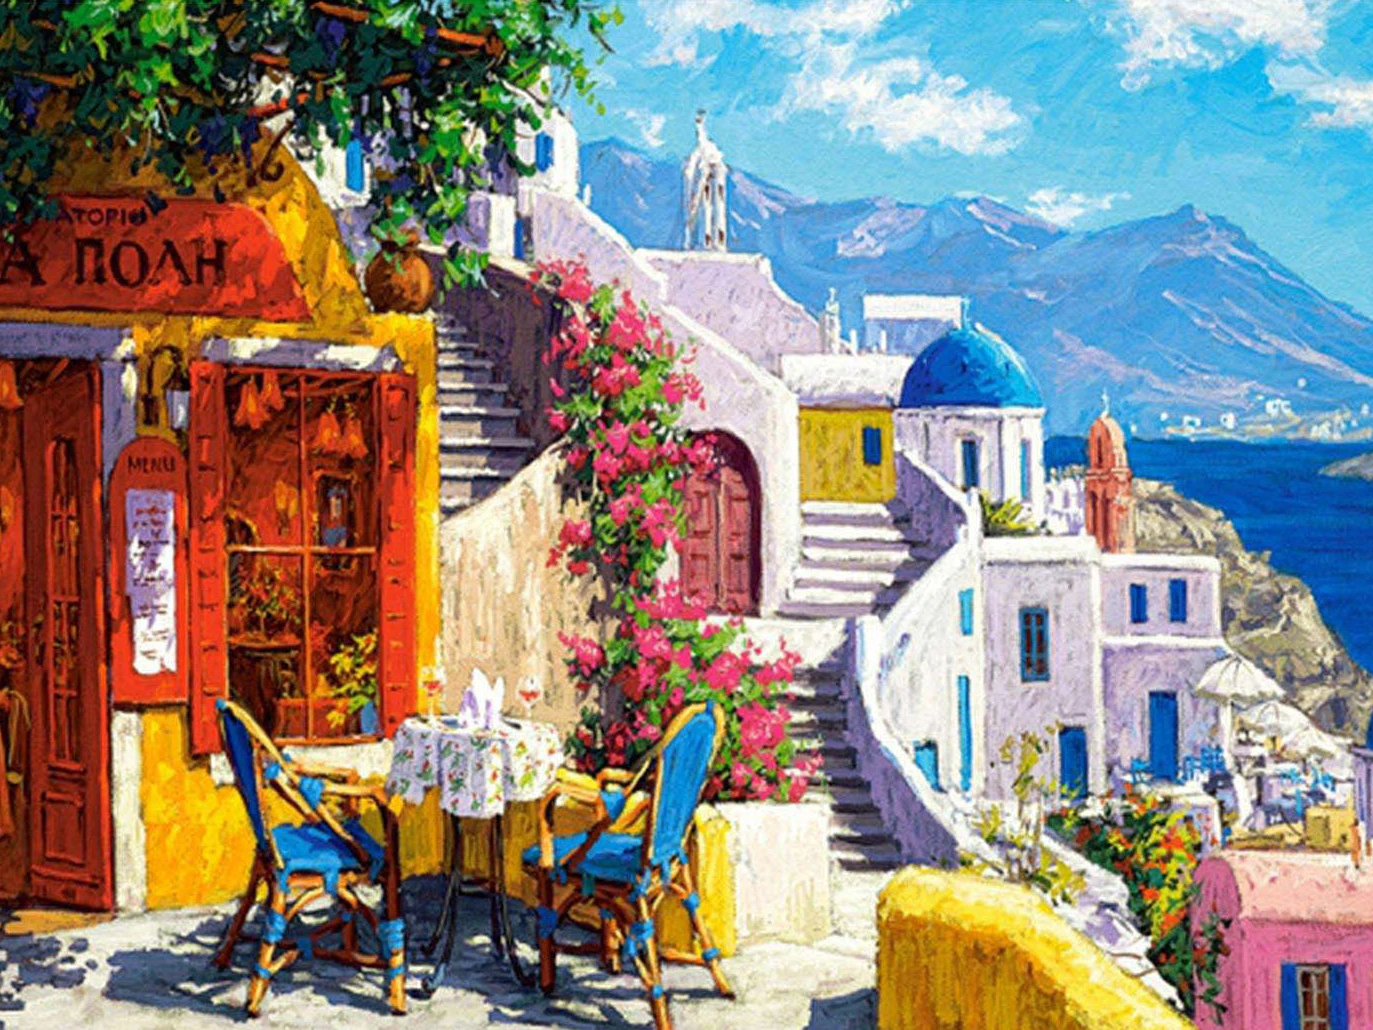 Diamond Painting Landscape Seaside Diamond Painting Greece Full Square Drill 5D Diy Diamond Embroidery Cross Stitch Kit for Home 